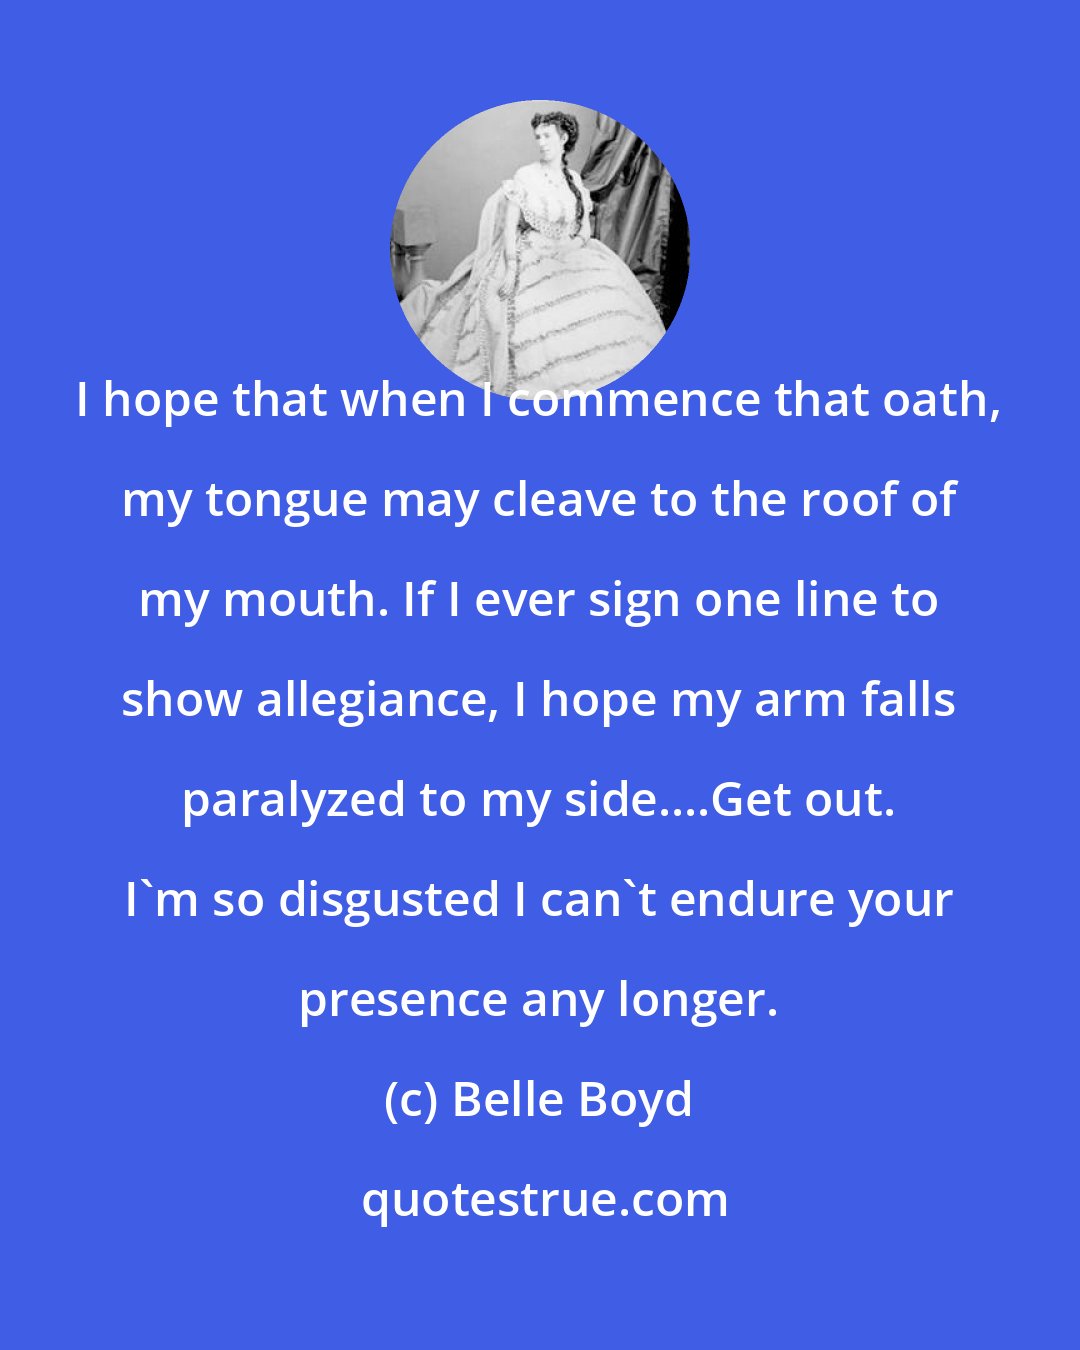 Belle Boyd: I hope that when I commence that oath, my tongue may cleave to the roof of my mouth. If I ever sign one line to show allegiance, I hope my arm falls paralyzed to my side....Get out. I'm so disgusted I can't endure your presence any longer.